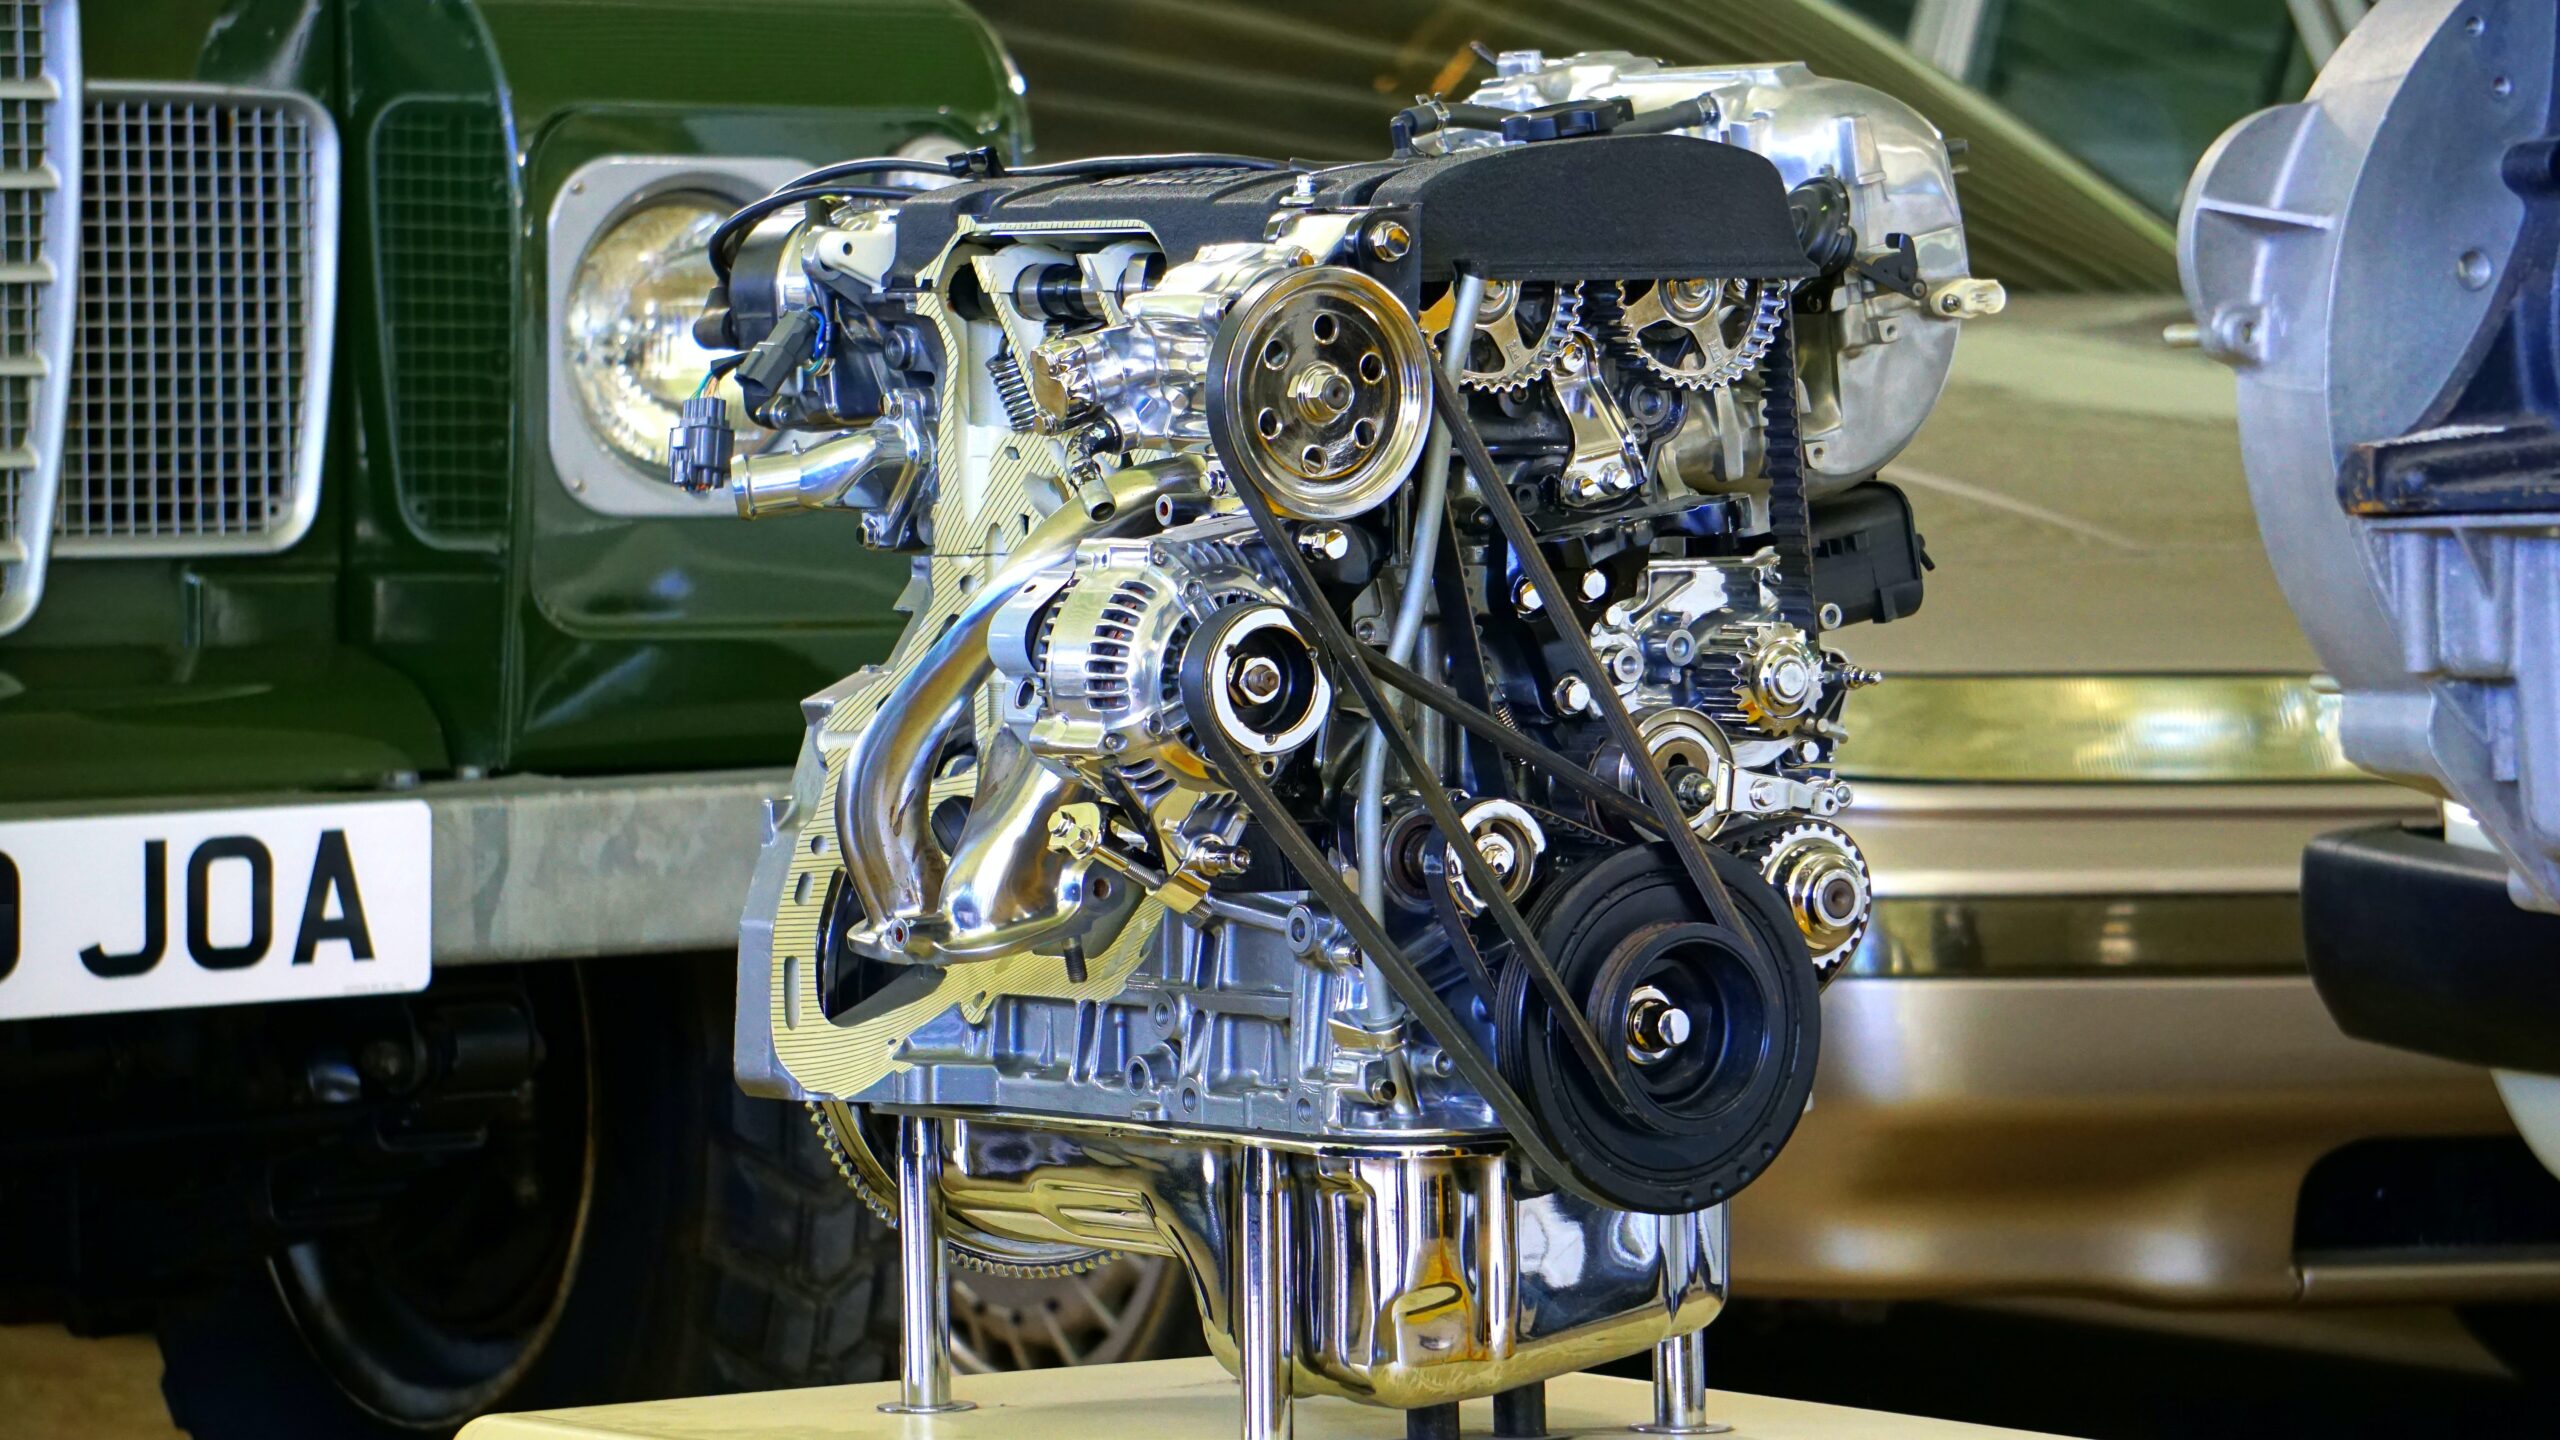 A picture of an engine out of its chassis